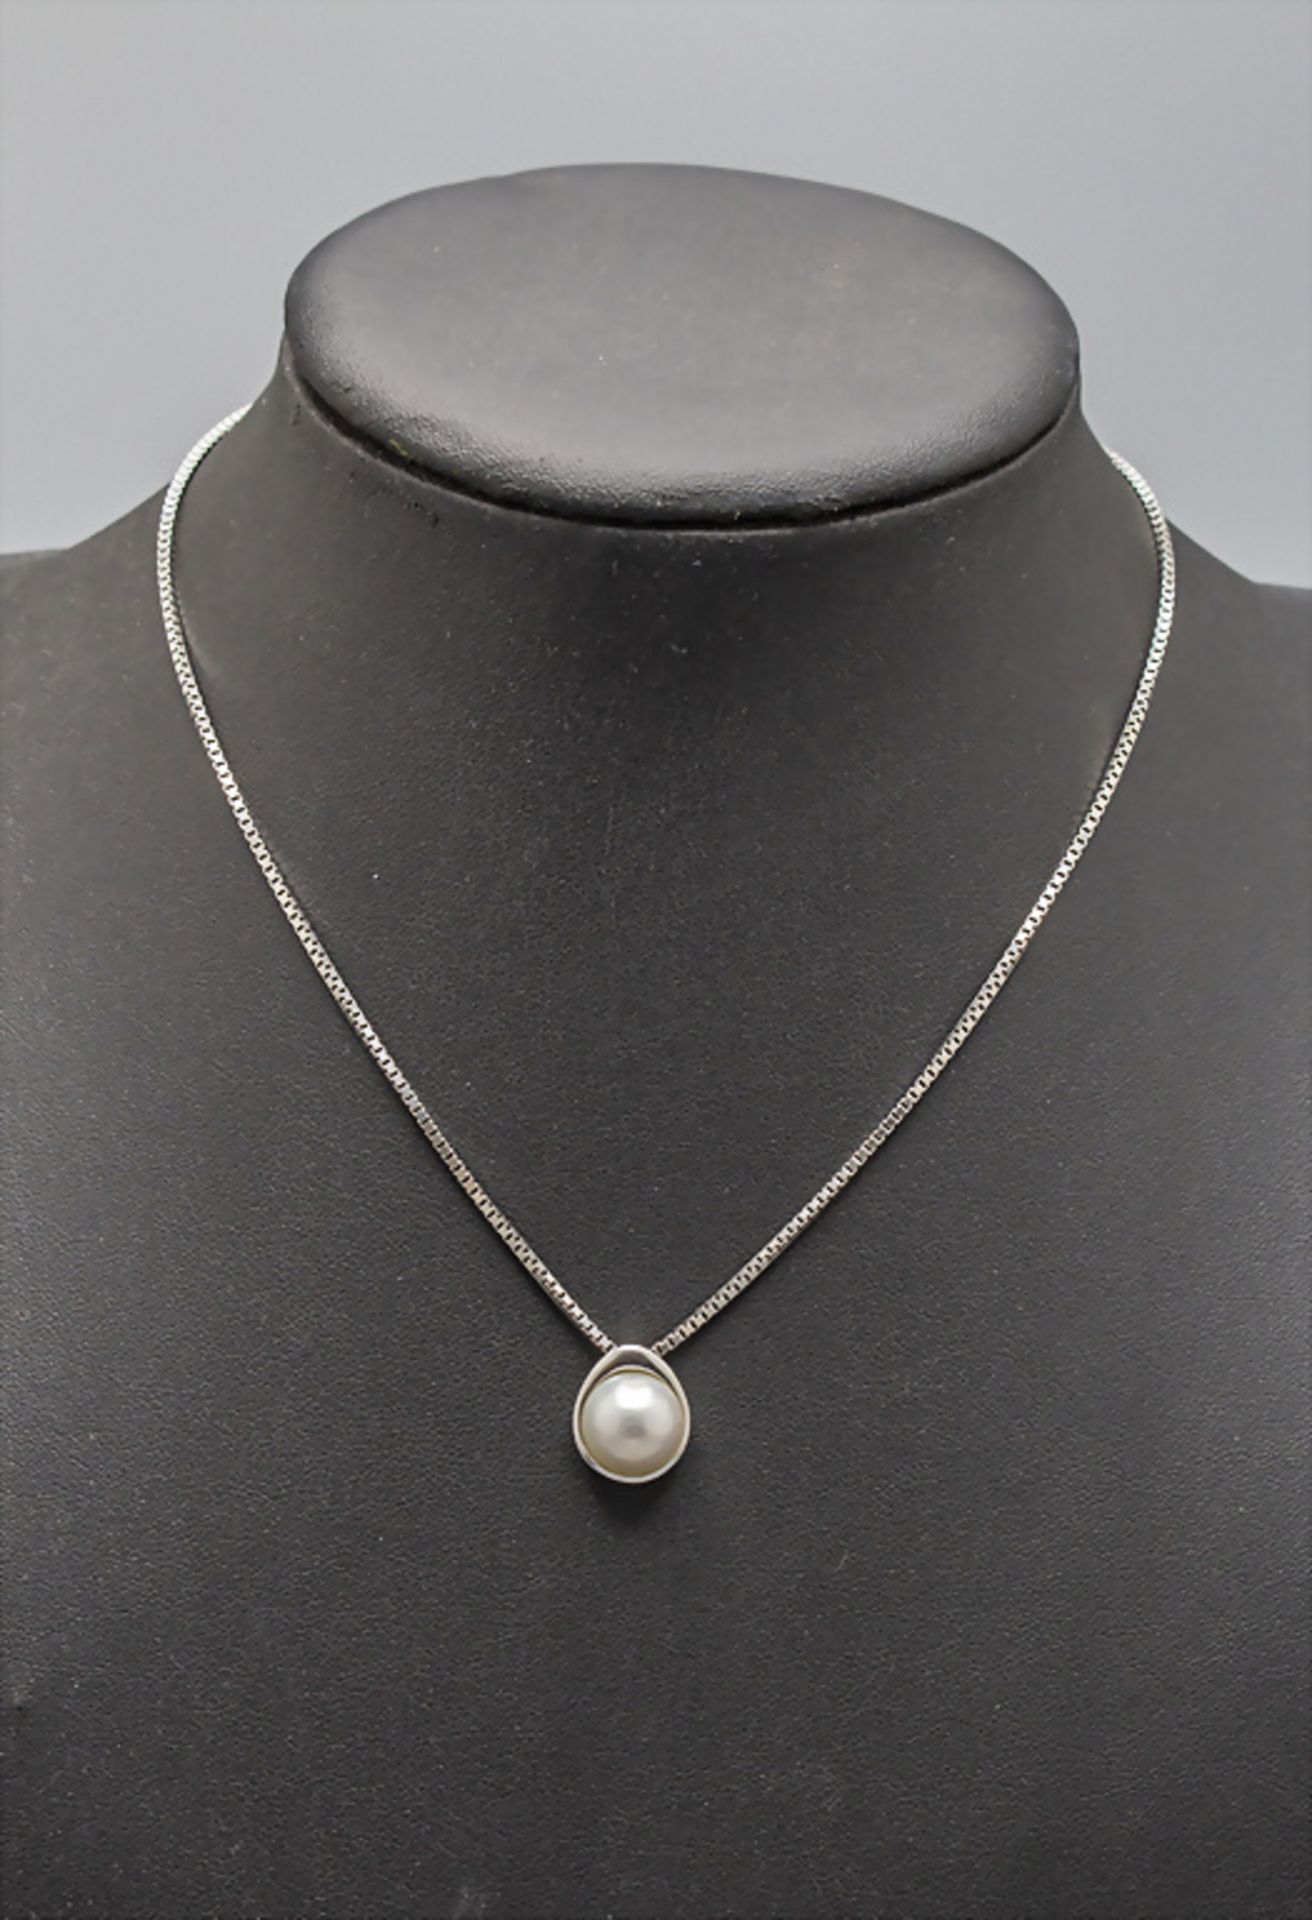 Weißgoldkette mit Perlenanhänger / A 14 ct white gold necklace with pearl pendant